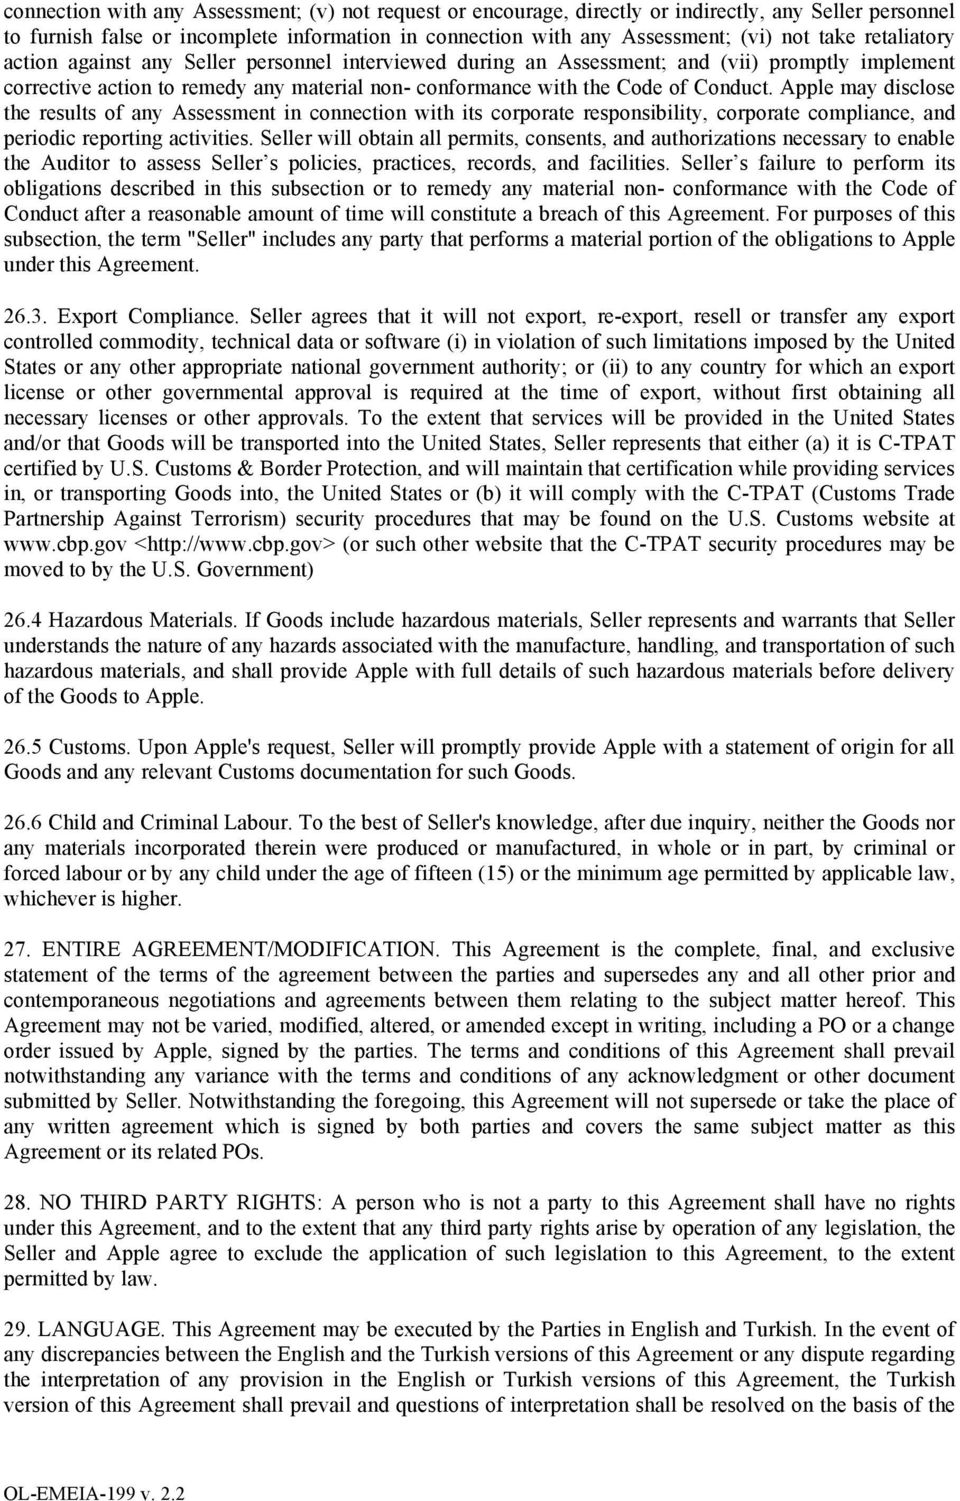 Apple may disclose the results of any Assessment in connection with its corporate responsibility, corporate compliance, and periodic reporting activities.